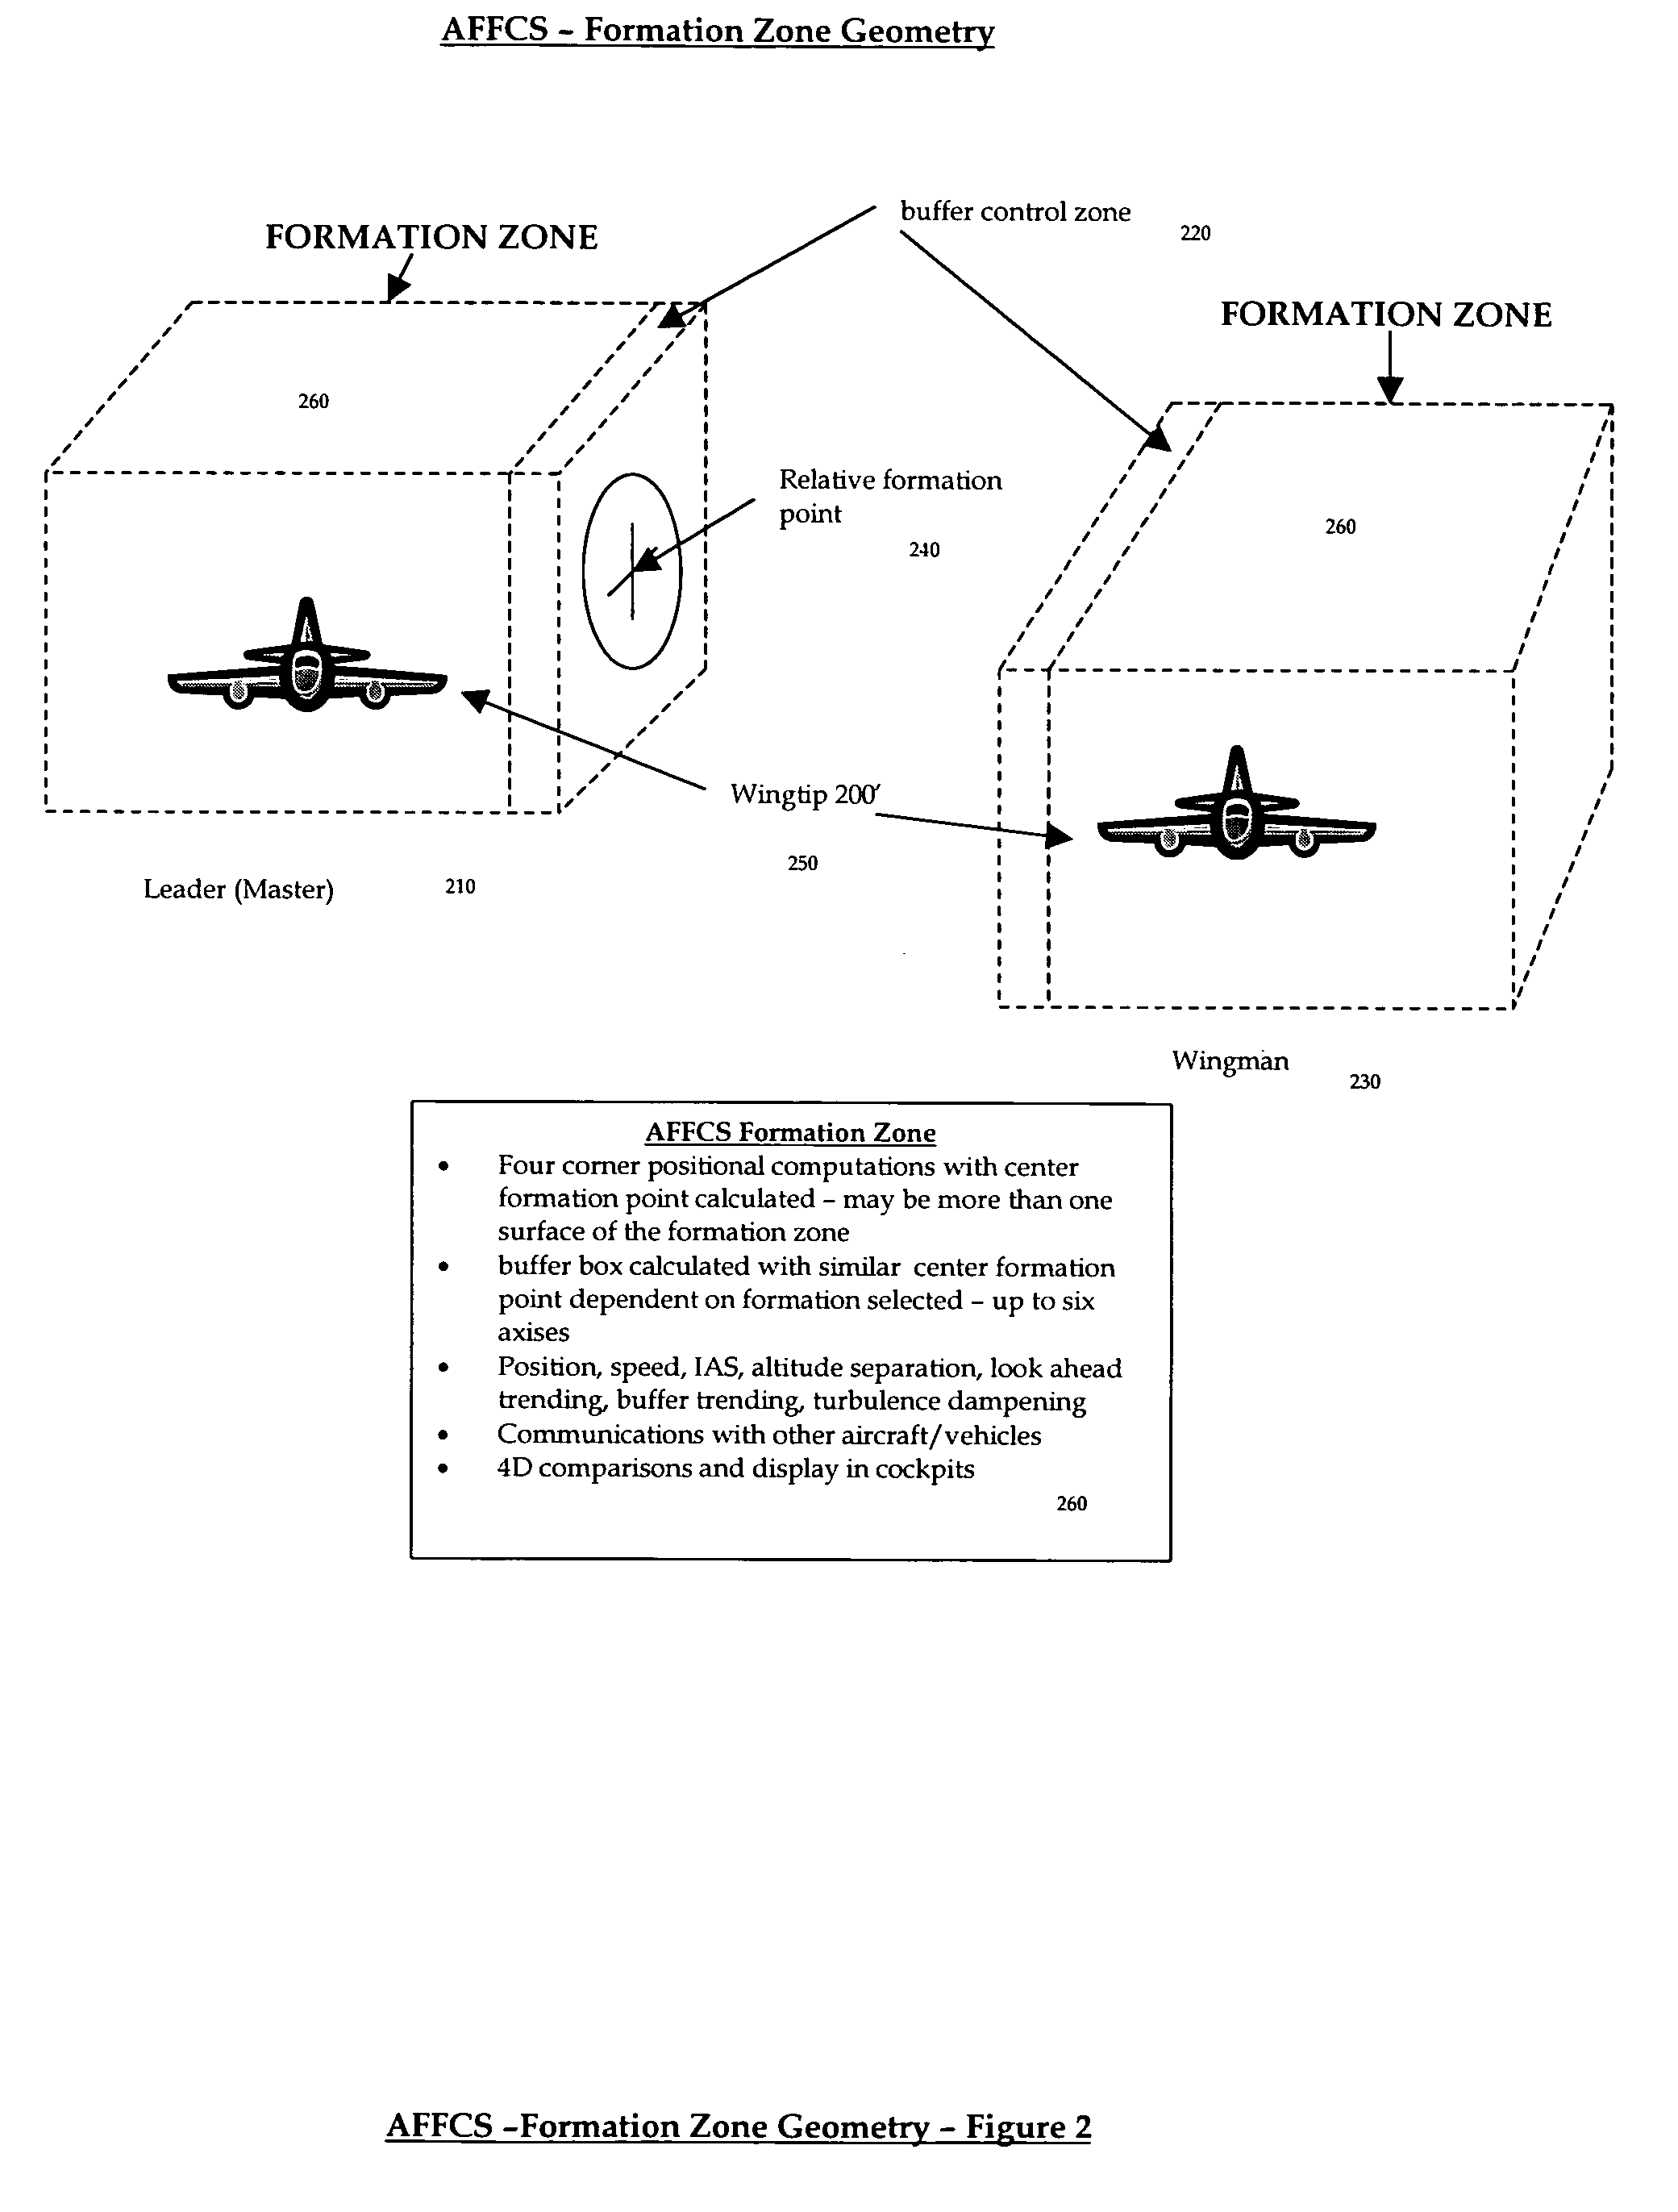 Automatic formation flight control system (AFFCS)-a system for automatic formation flight control of vehicles not limited to aircraft, helicopters, or space platforms